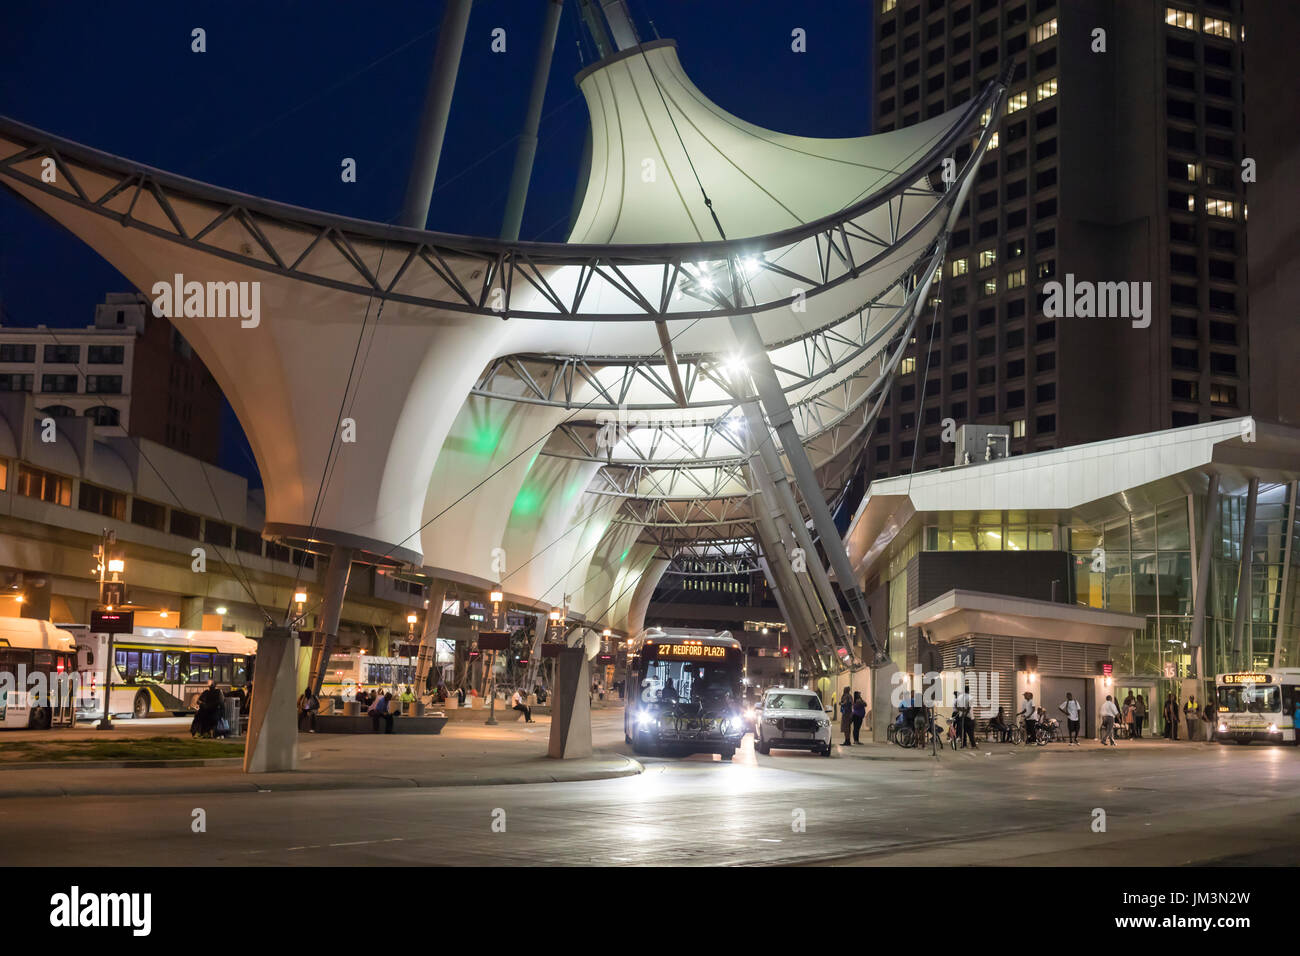 Detroit, Michigan - The Rosa Parks Transit Center, Detroit's downtown station for local bus service. Stock Photo